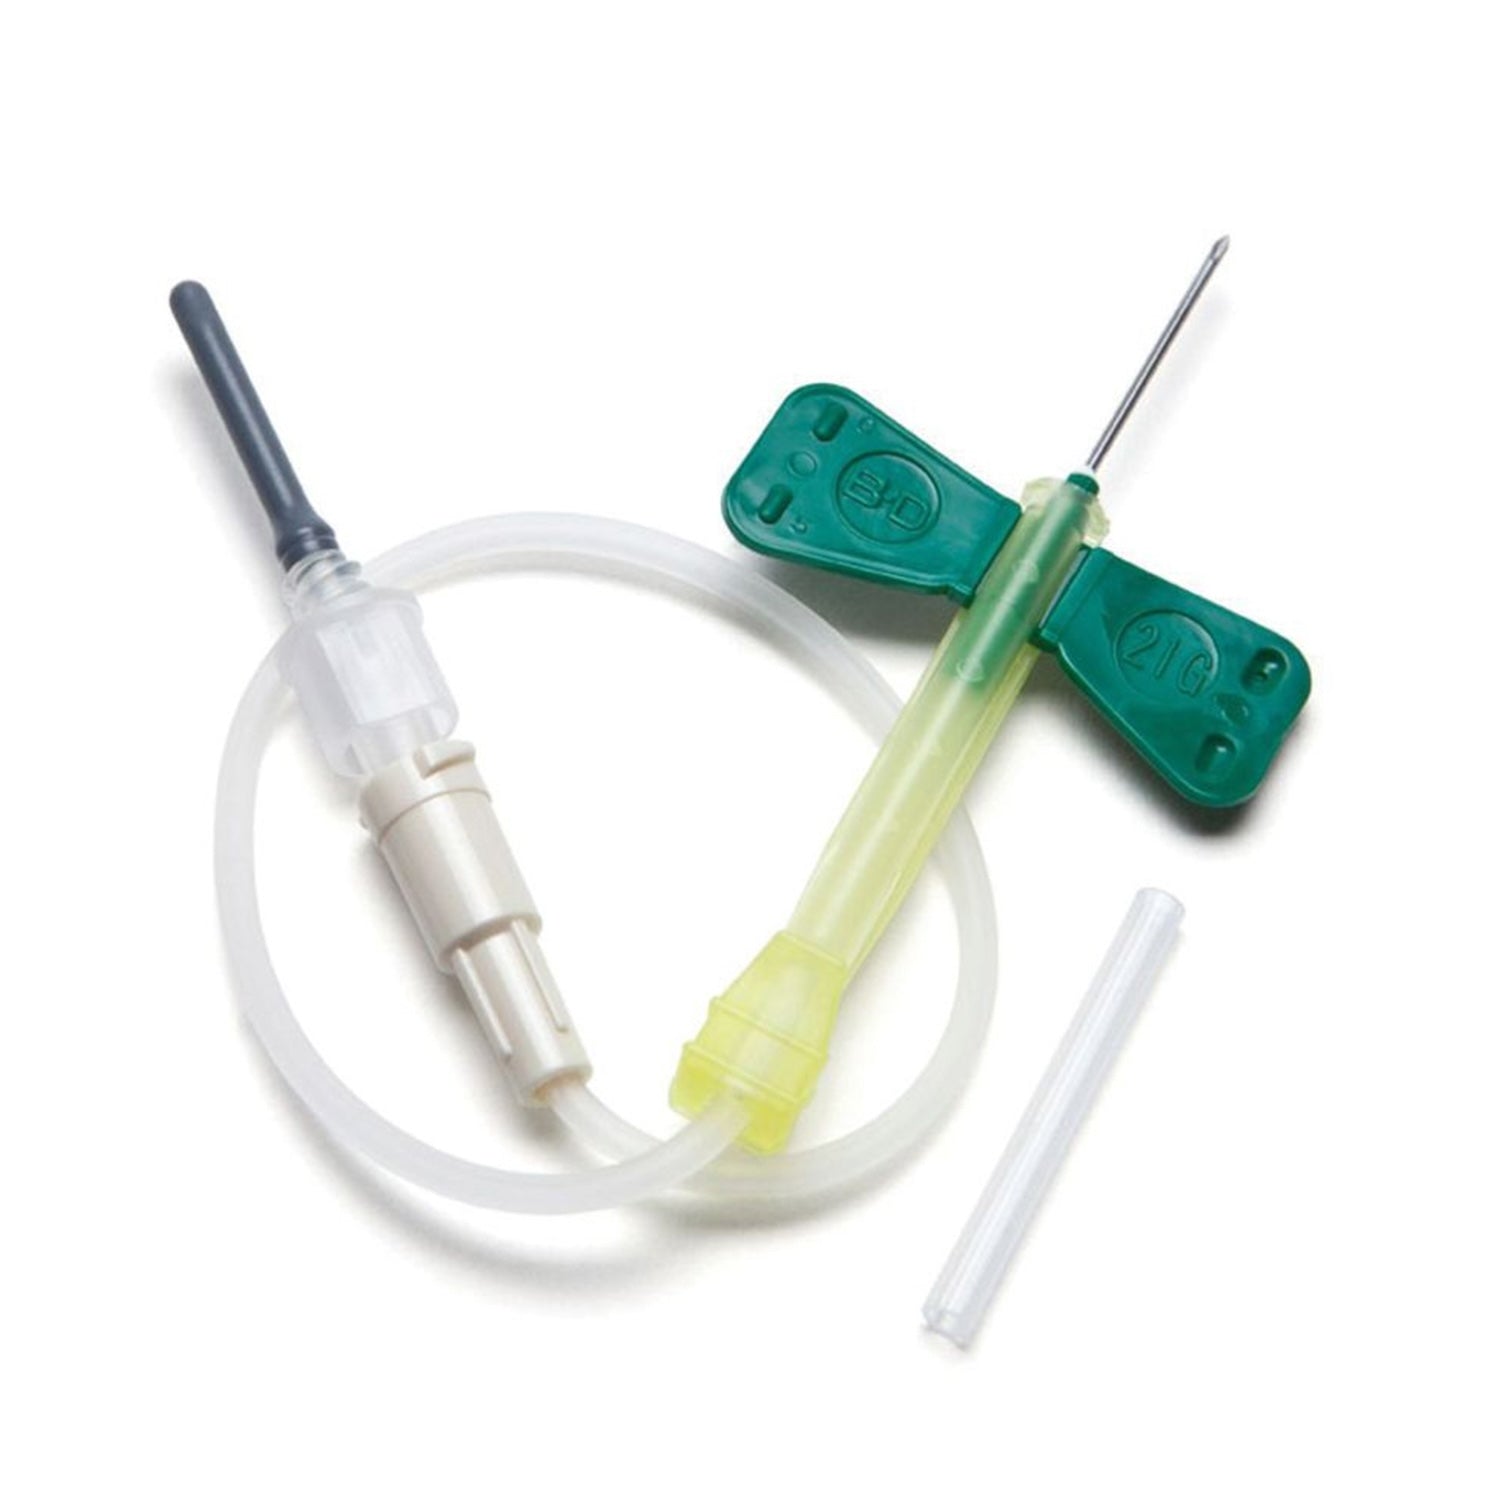 BD Vacutainer Safety Lok Blood Collection System | 0.75" Needle | 21G x 7" Tubing | Pack of 50